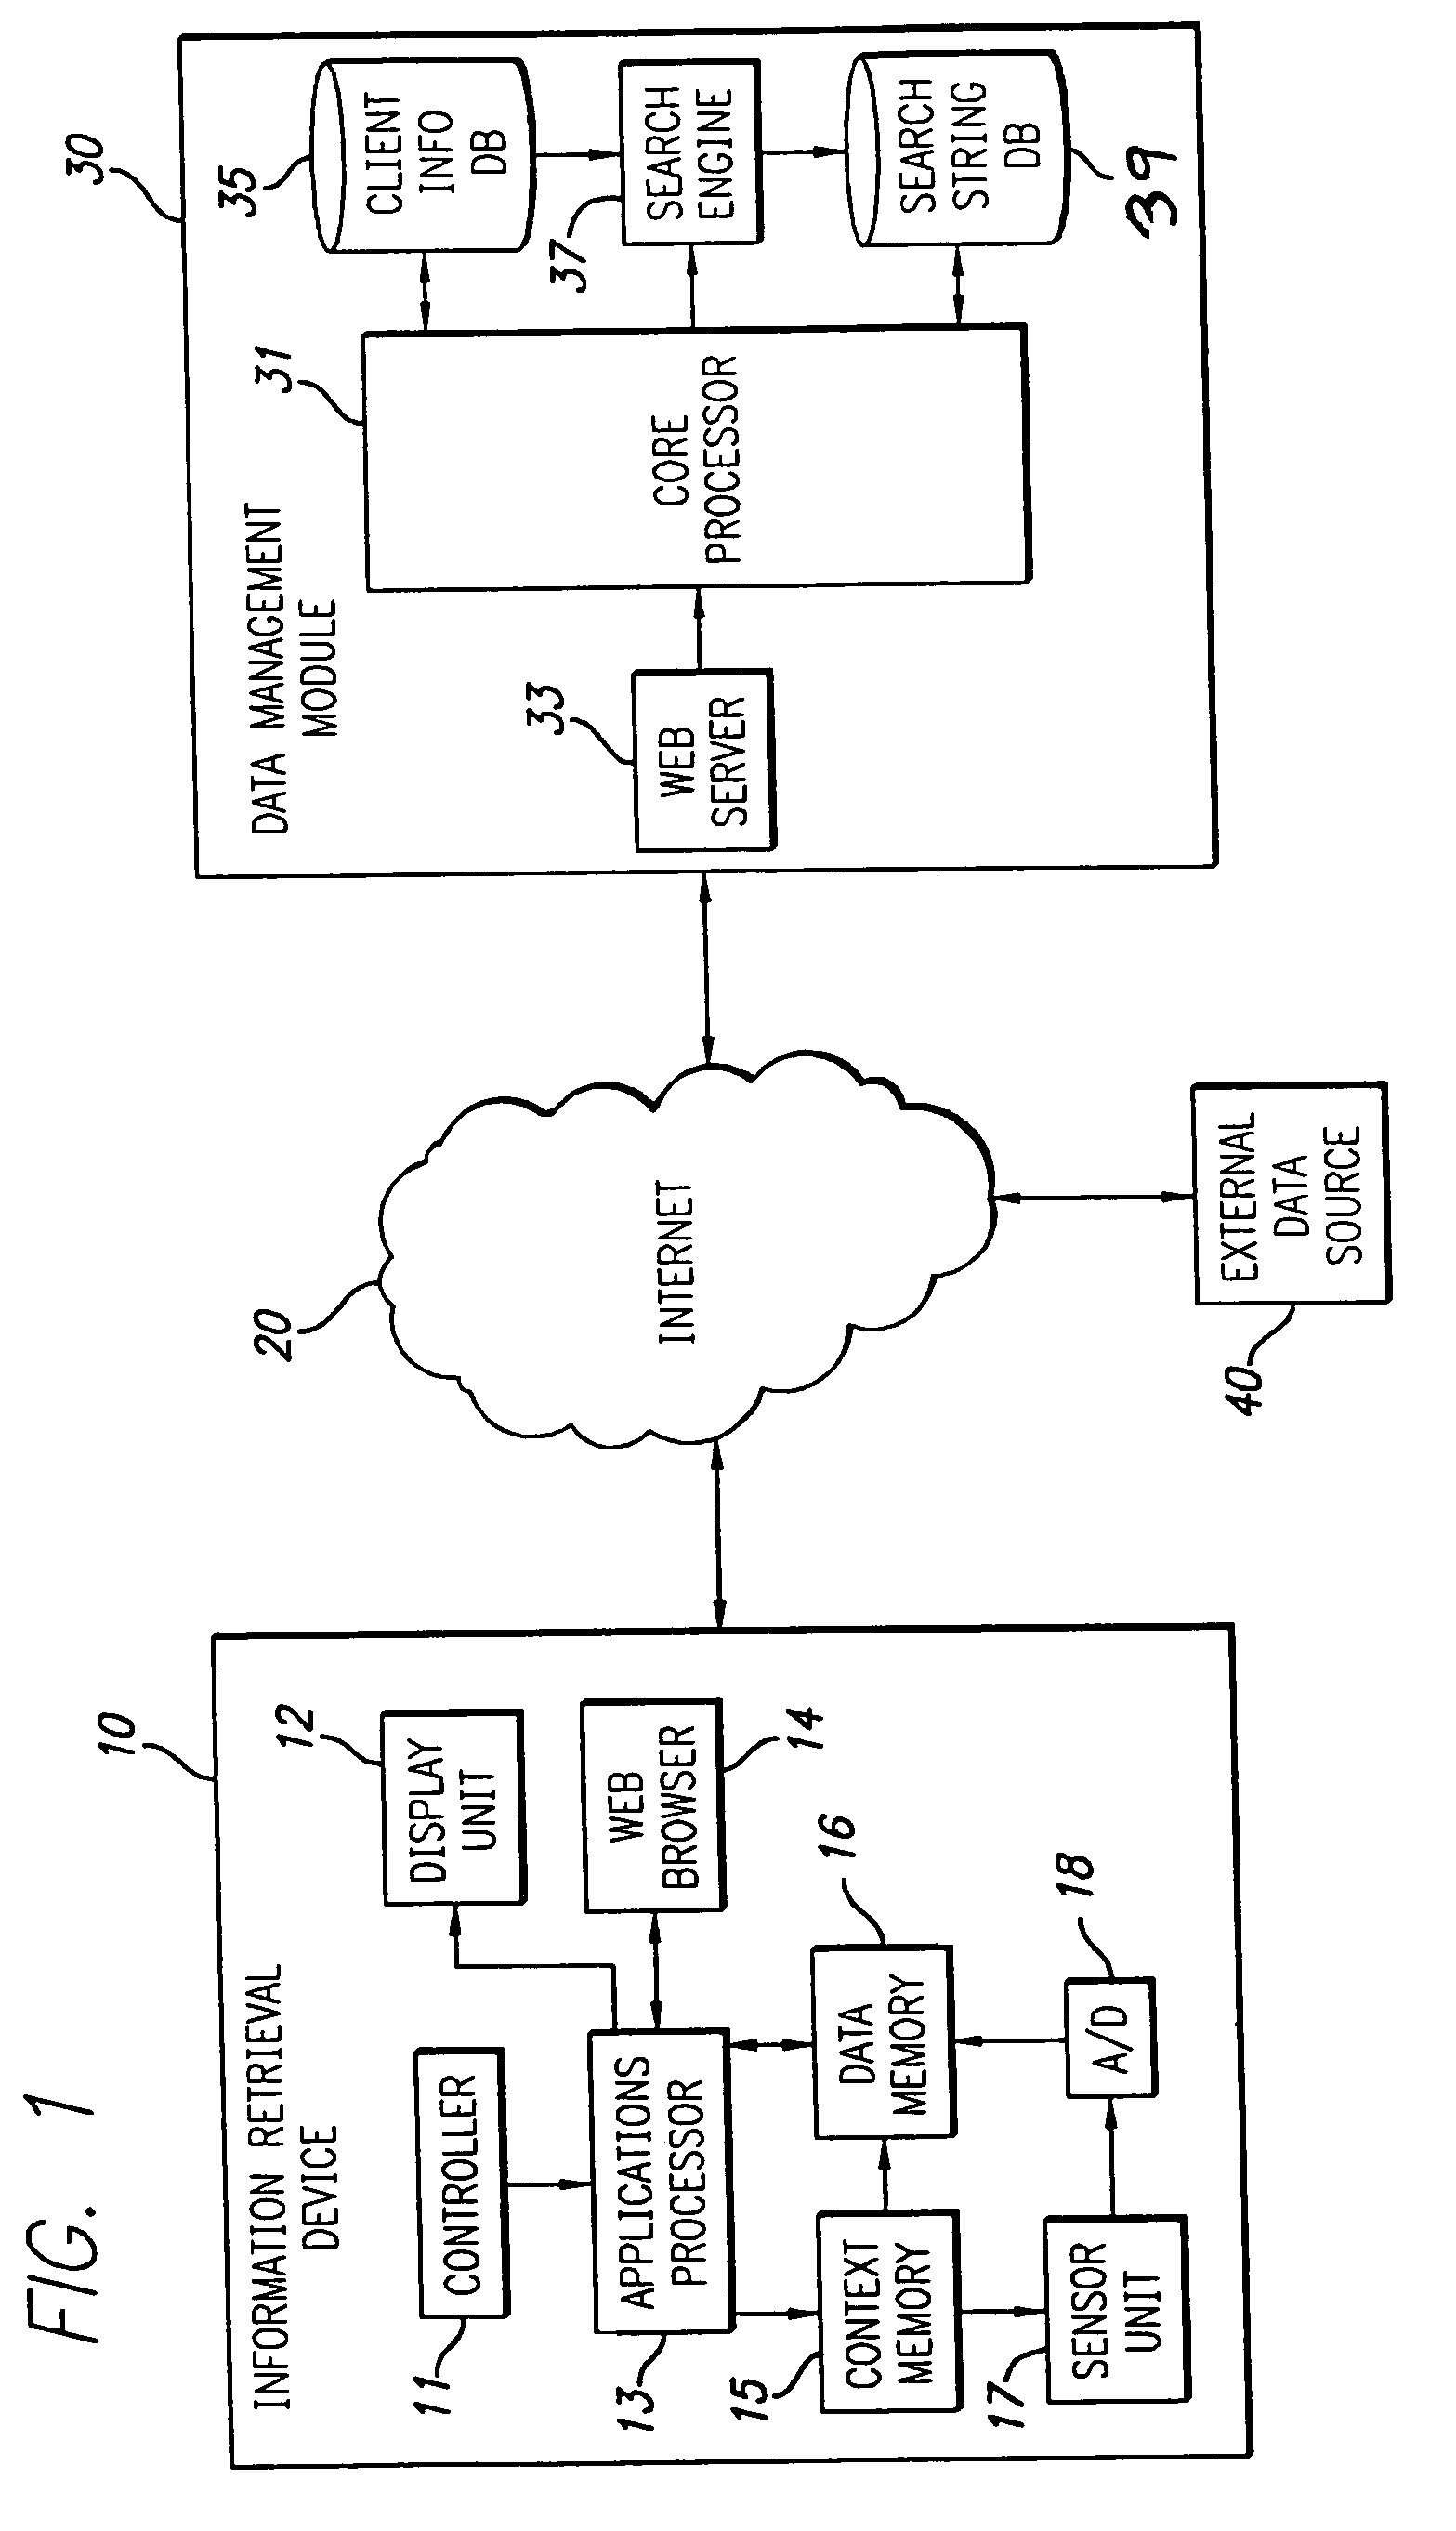 Method and apparatus for delivering content via information retrieval devices